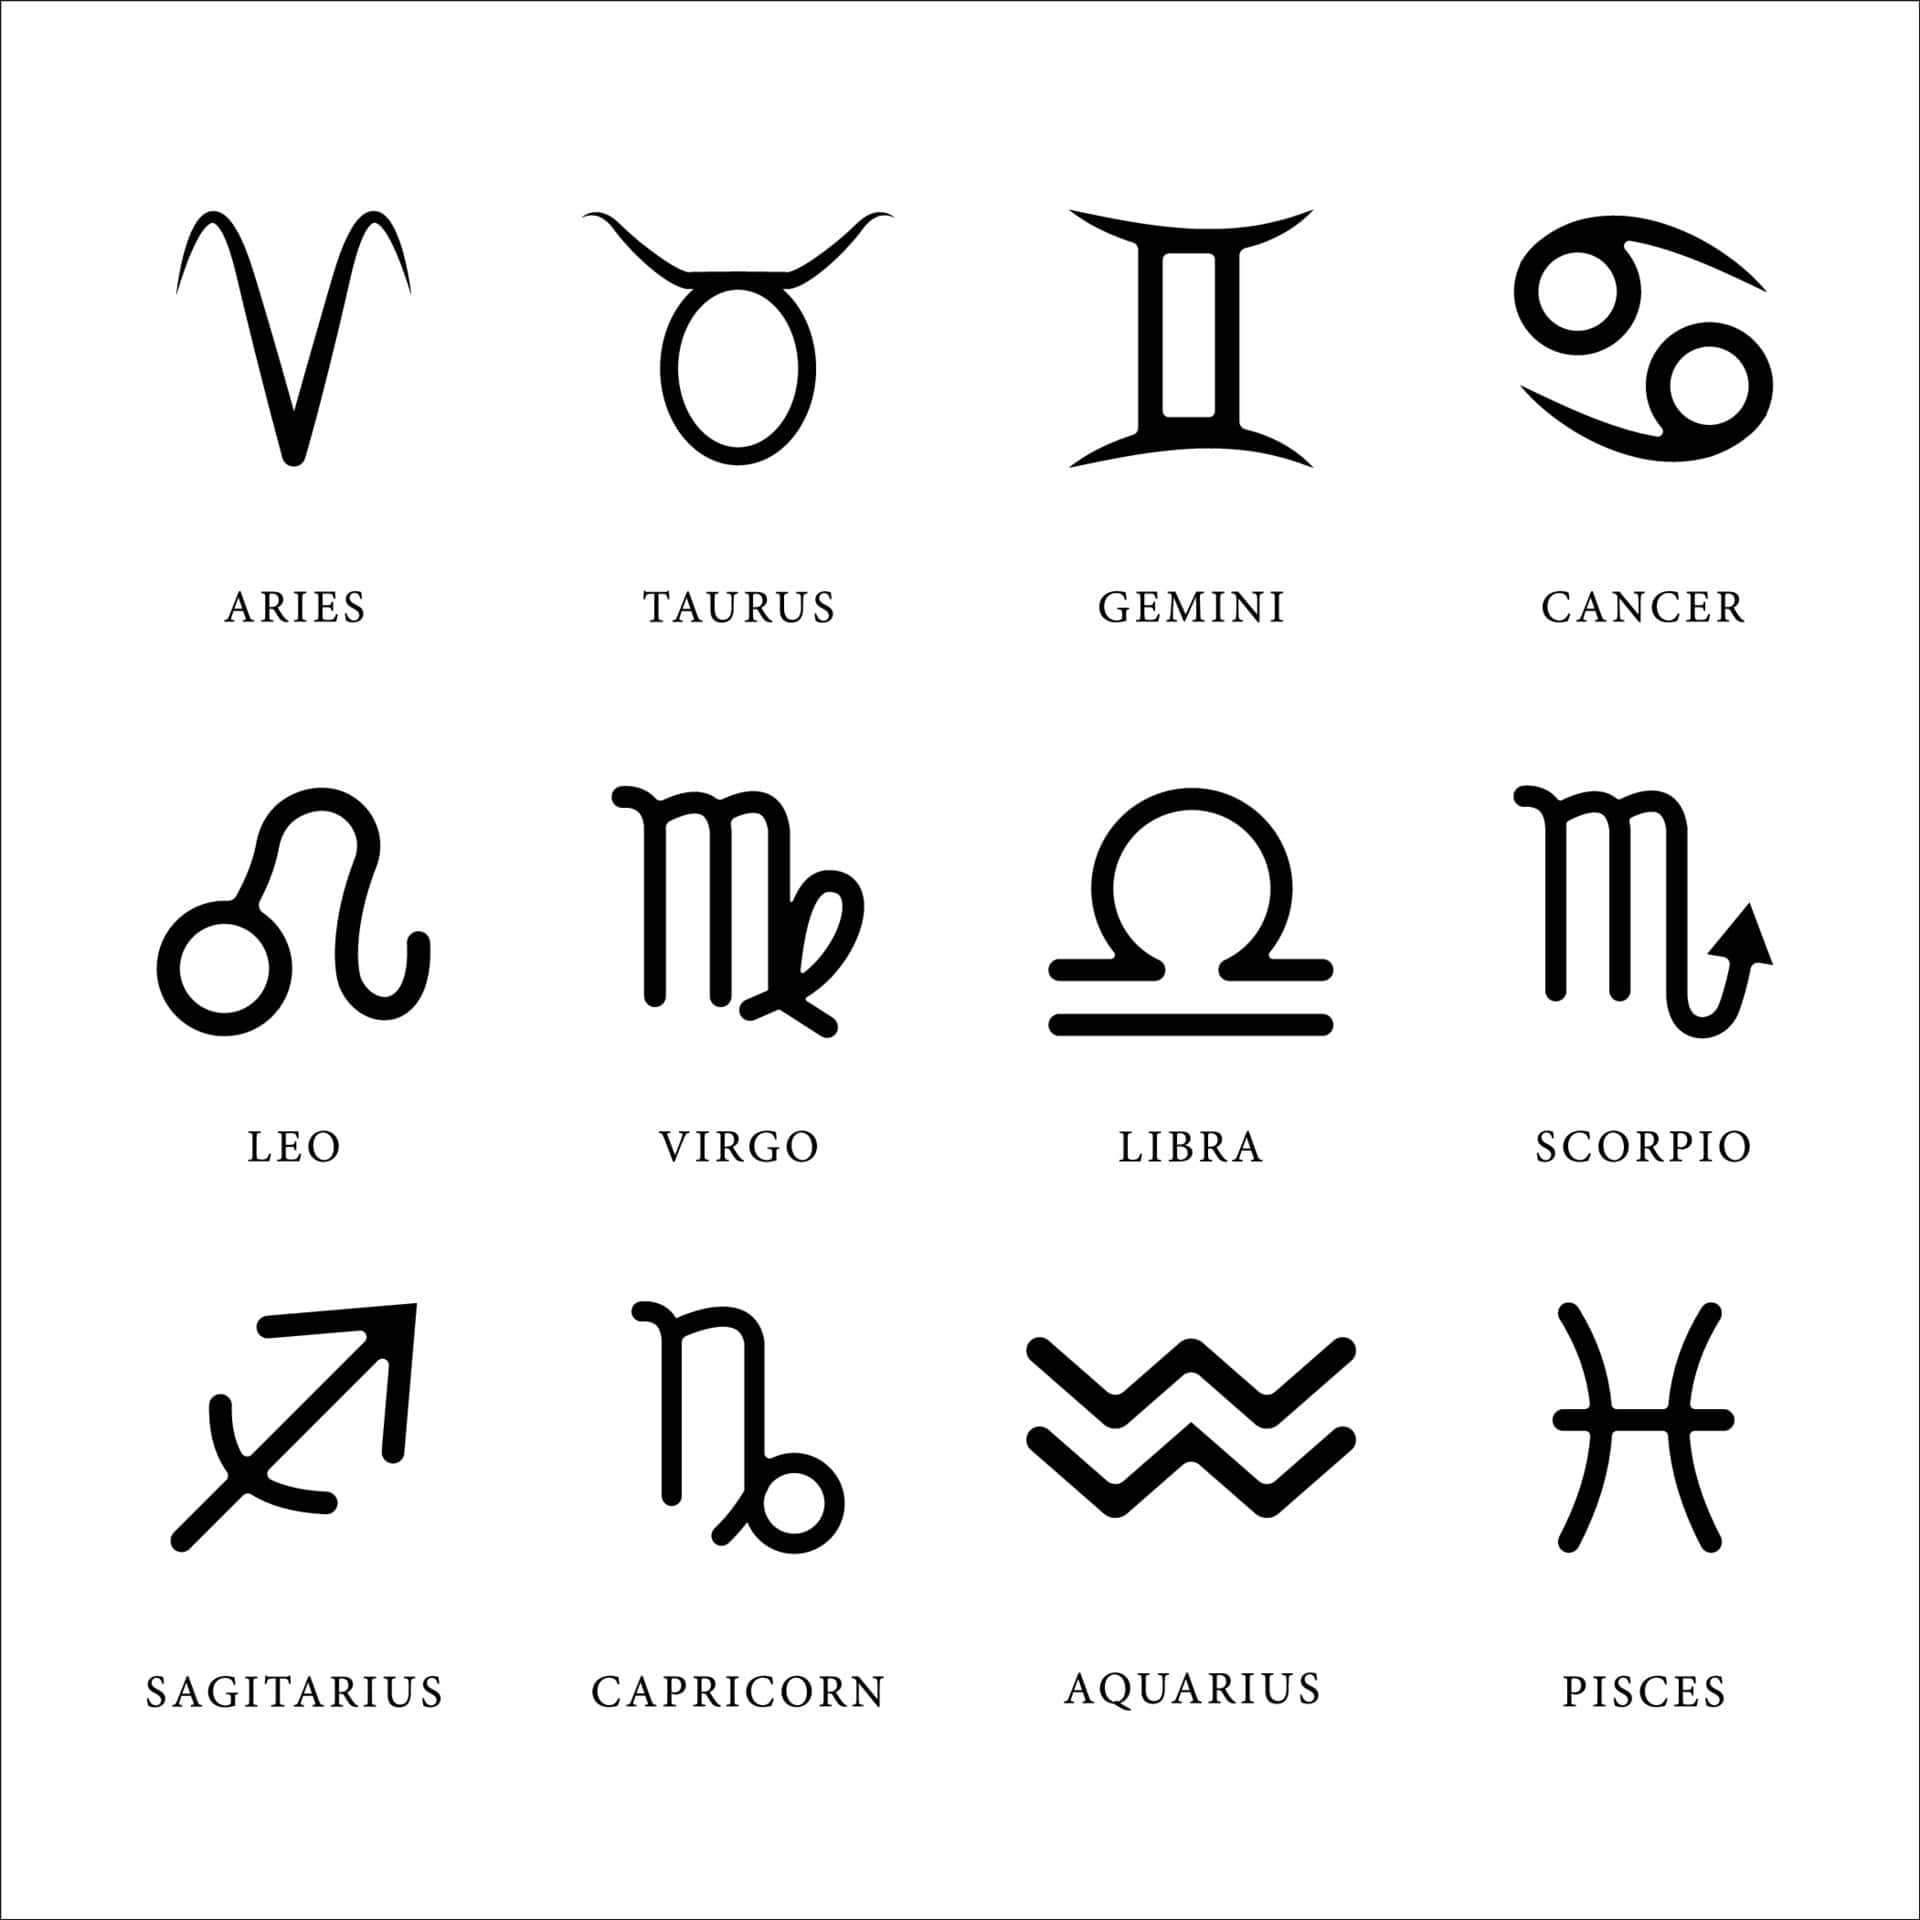 Download Zodiac Pictures | Wallpapers.com